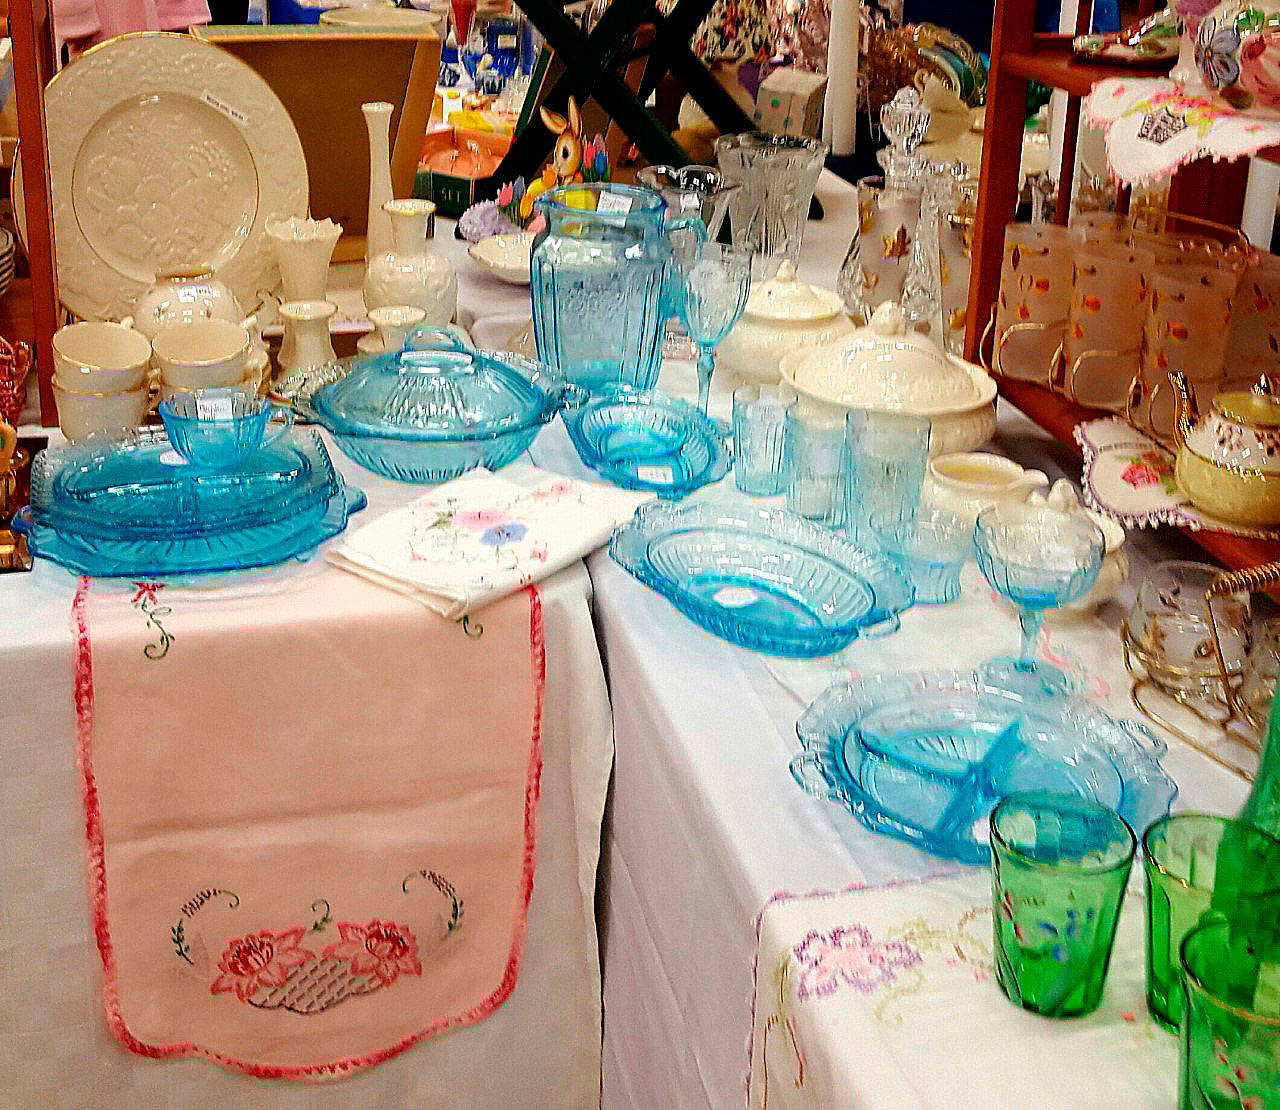 The 41st annual Green River Glass and Sale Show is Saturday, Feb. 24, at Kent Commons. COURTESY PHOTO